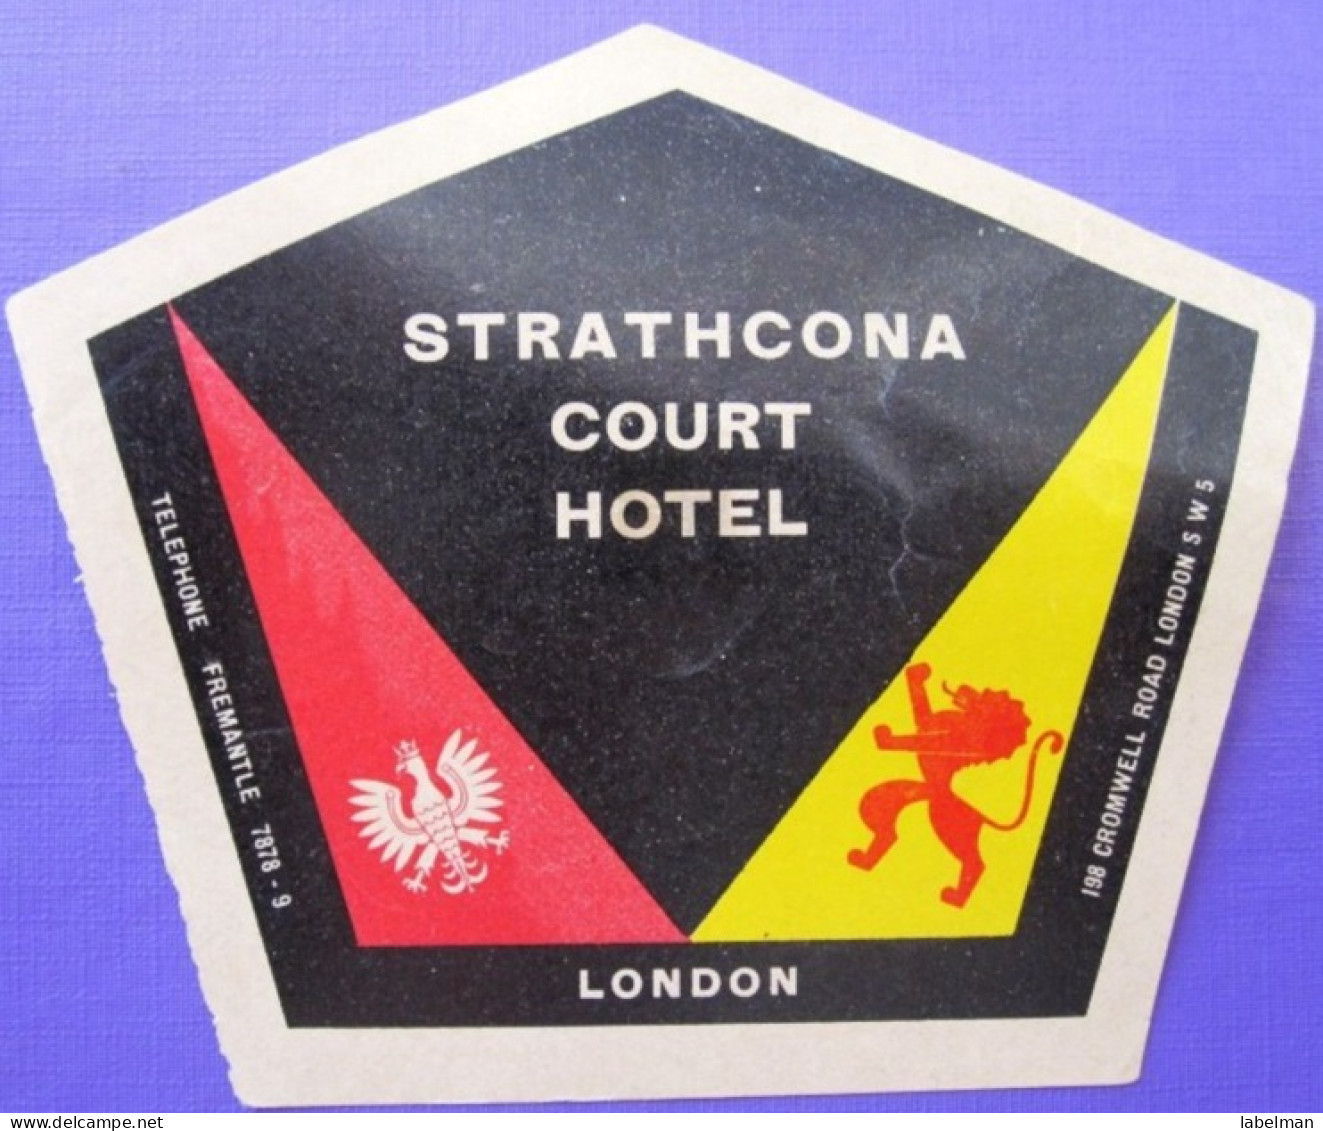 HOTEL PENSION MOTOR STRATHCONA COURT LONDON UK ENGLAND GREAT BRITAIN STICKER DECAL LUGGAGE LABEL ETIQUETTE AUFKLEBER - Hotel Labels